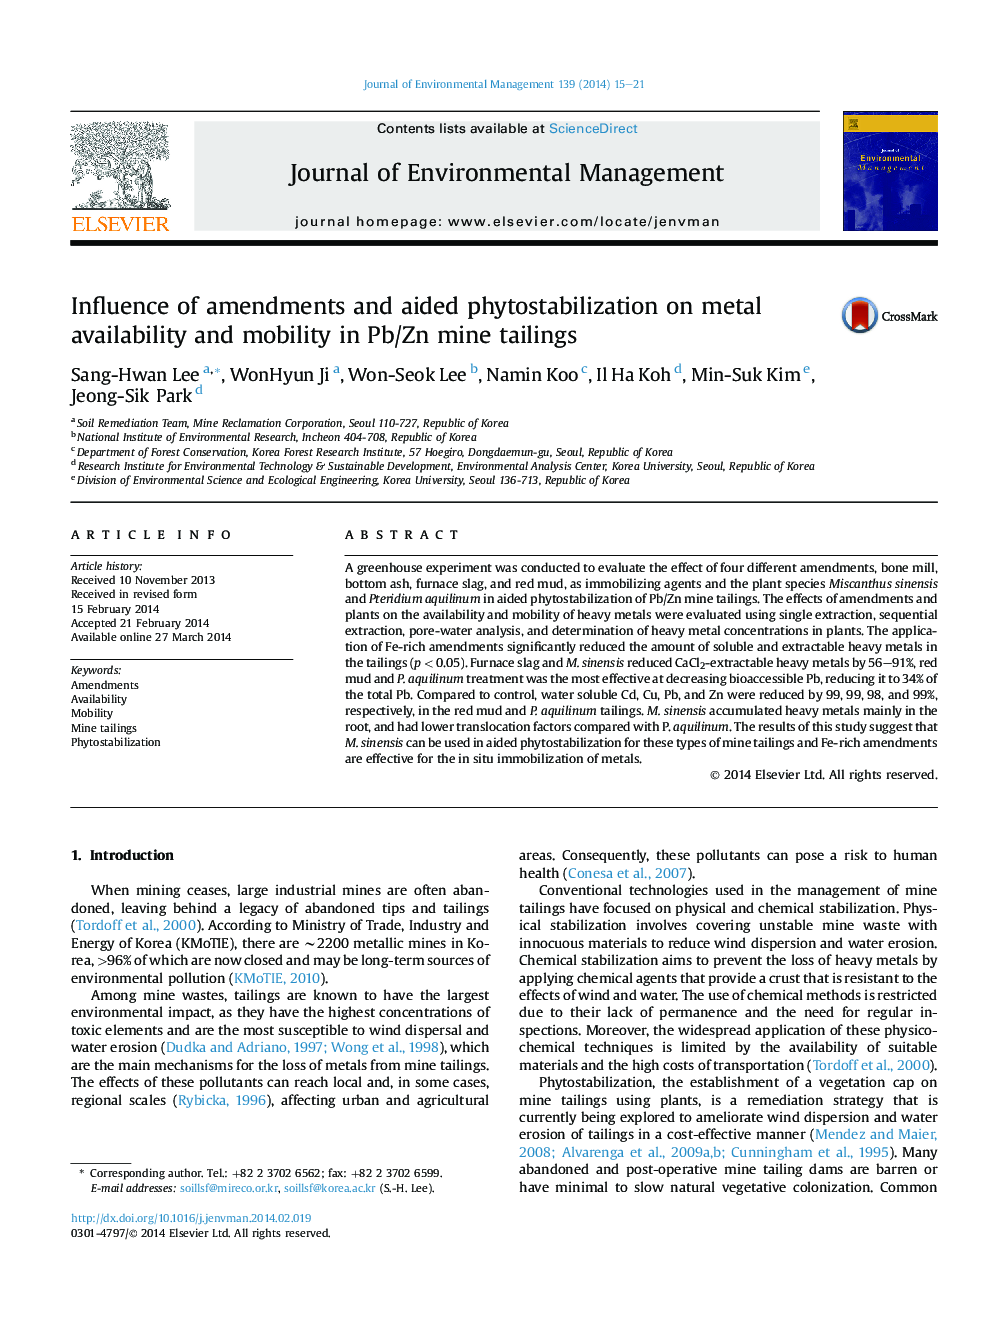 Influence of amendments and aided phytostabilization on metal availability and mobility in Pb/Zn mine tailings